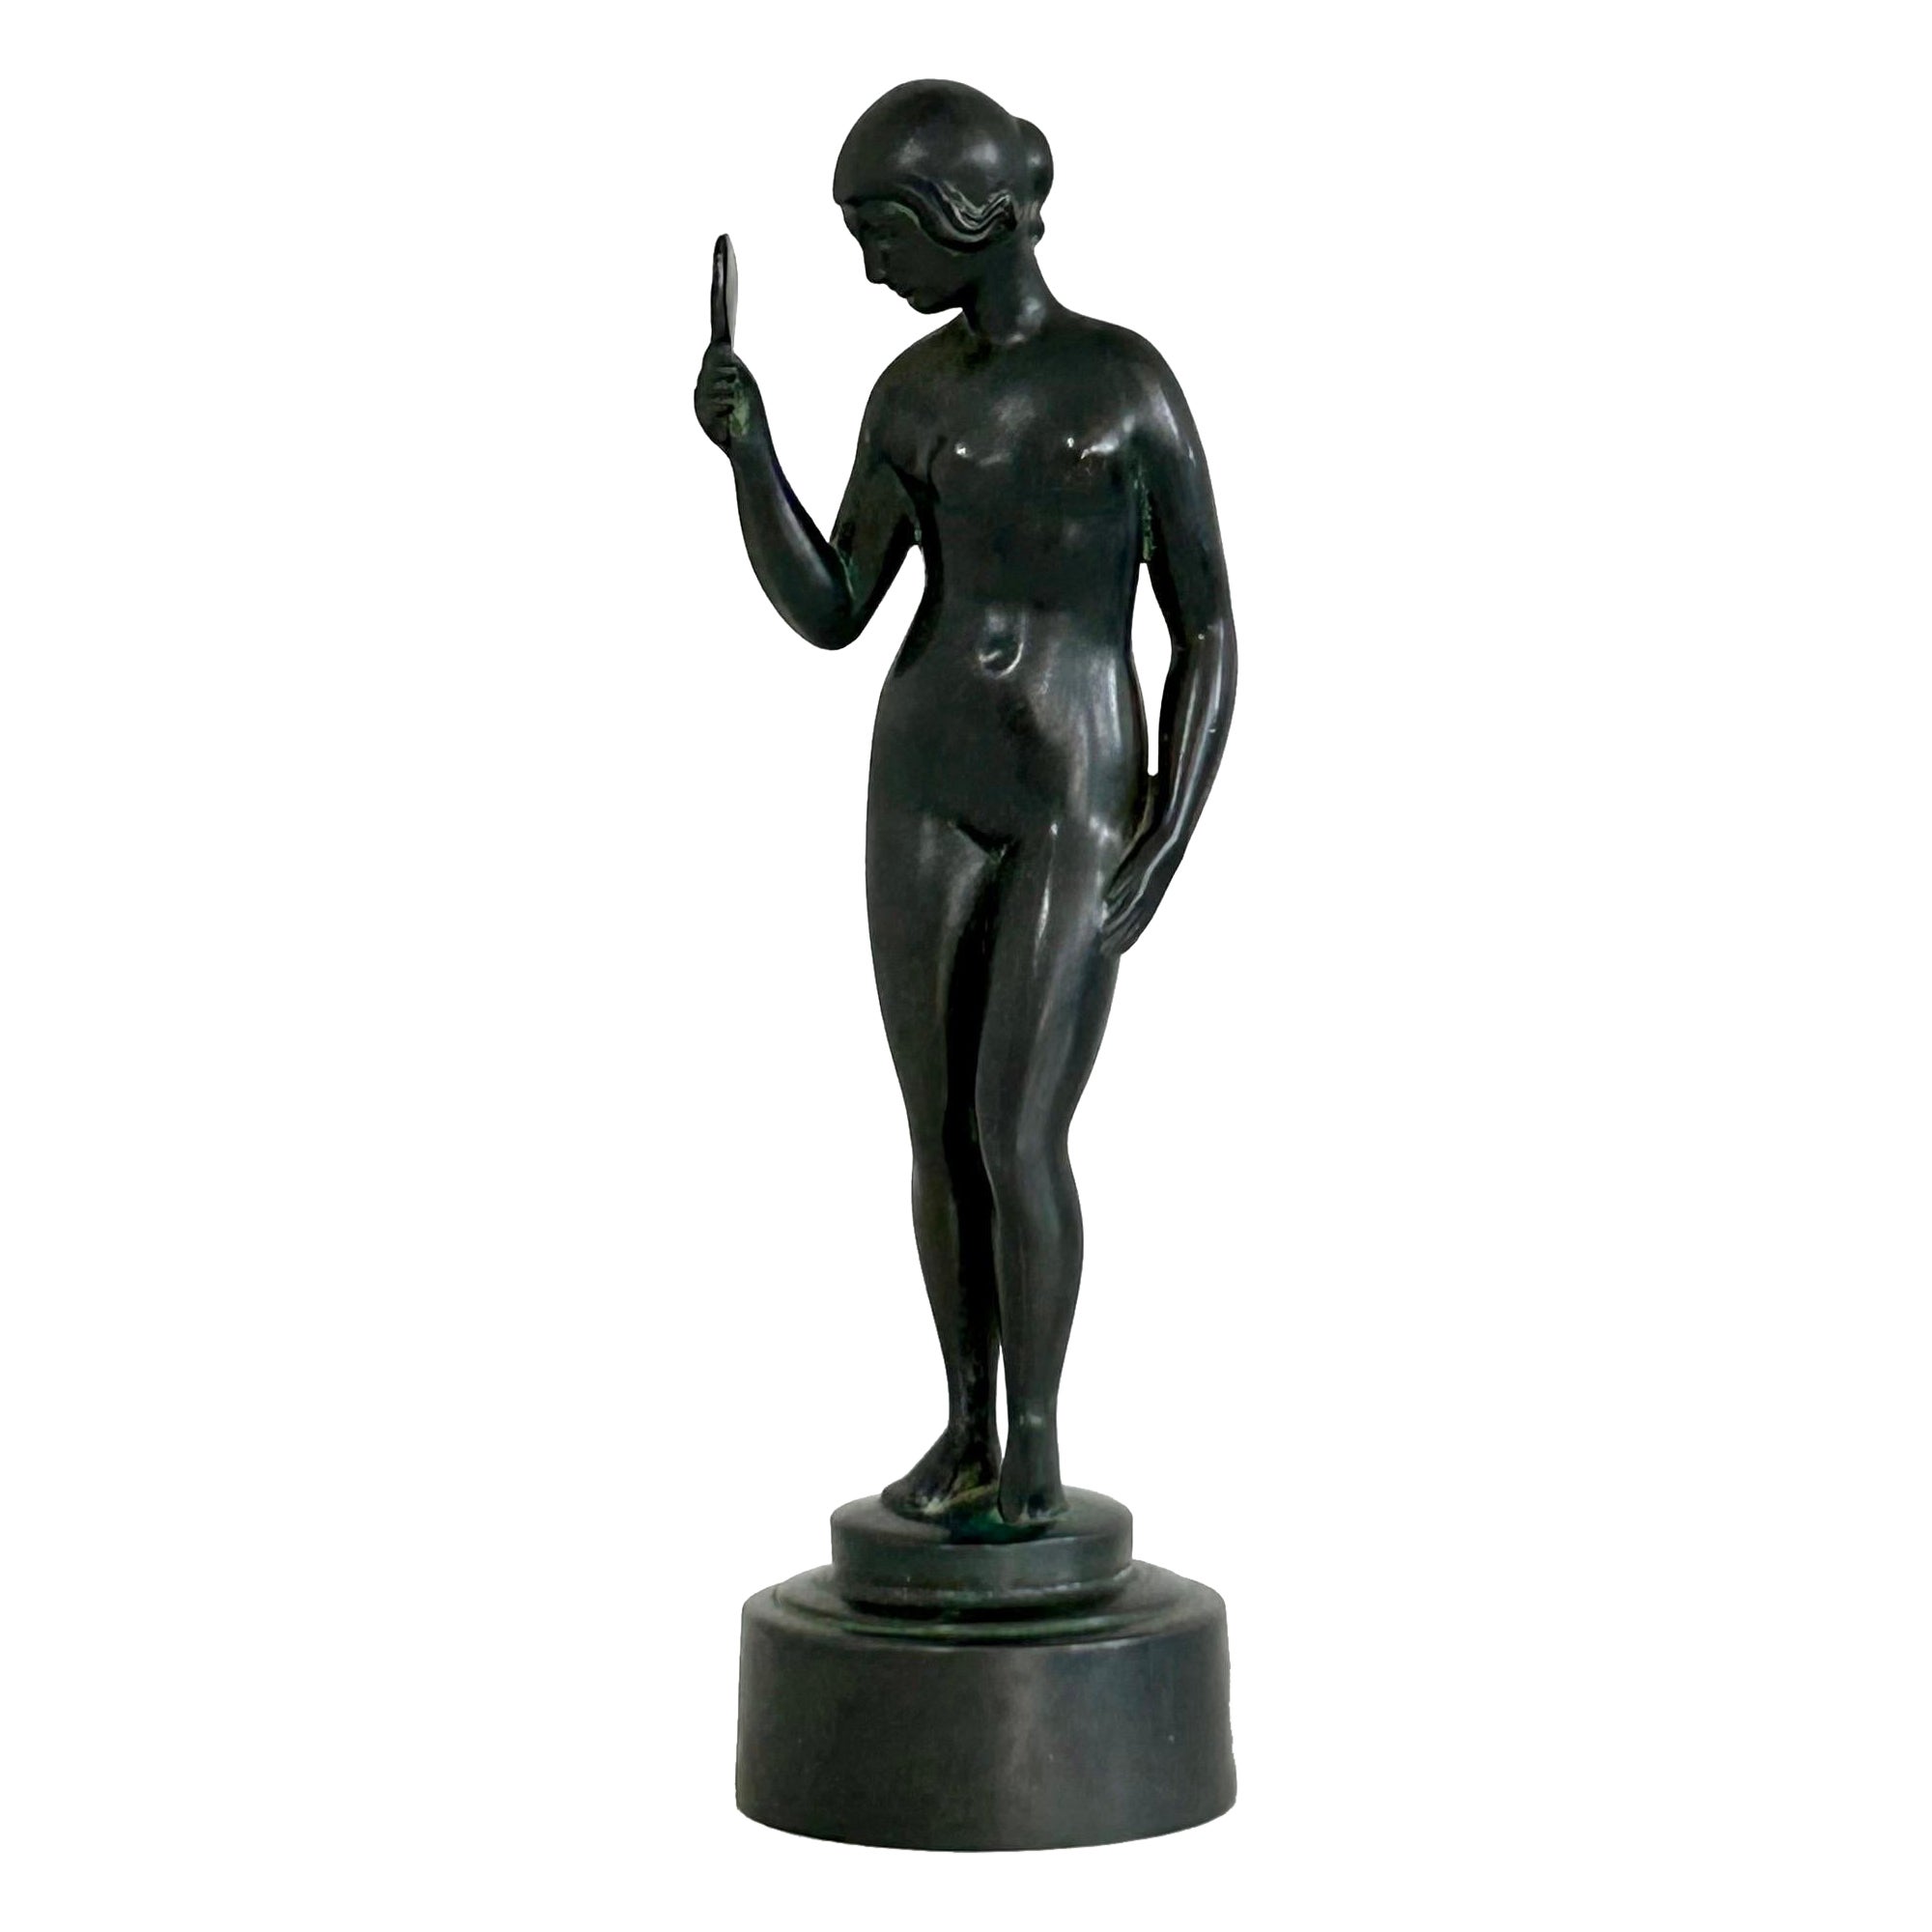 An early figurine by Just Andersen, 1920s, Denmark